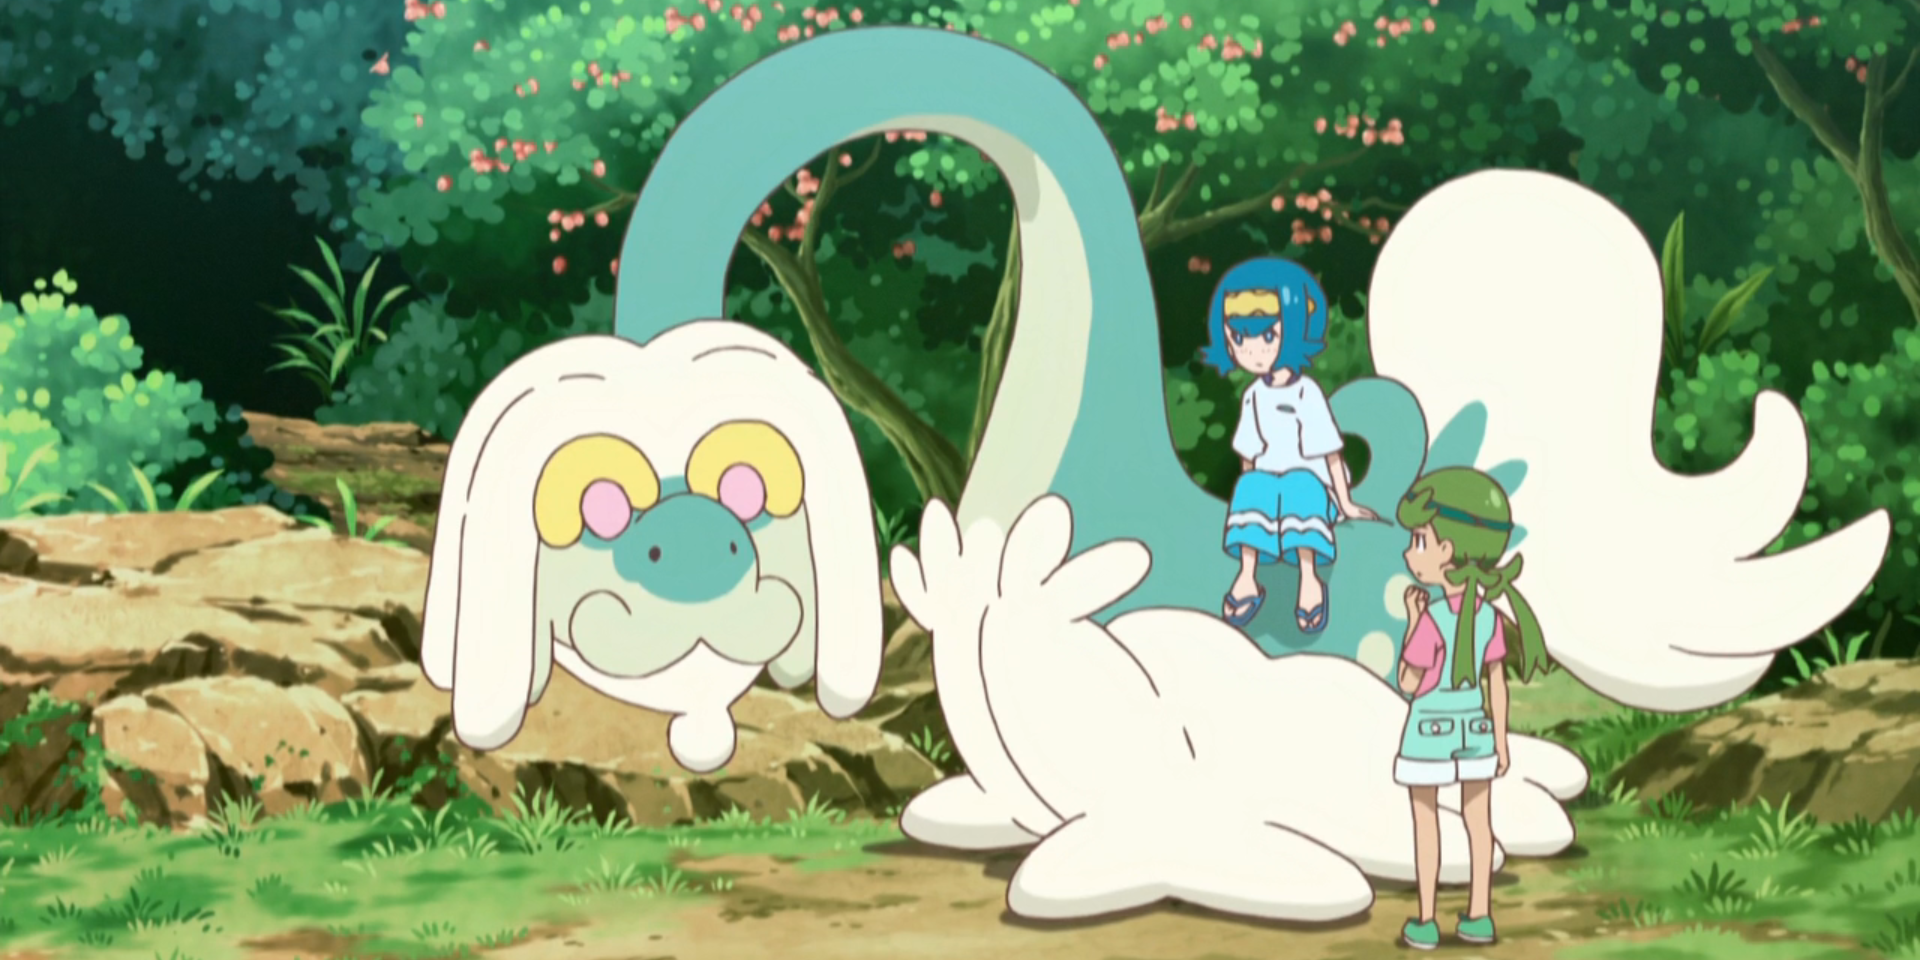 The Pokemon Drampa along with young trainers keeping it company